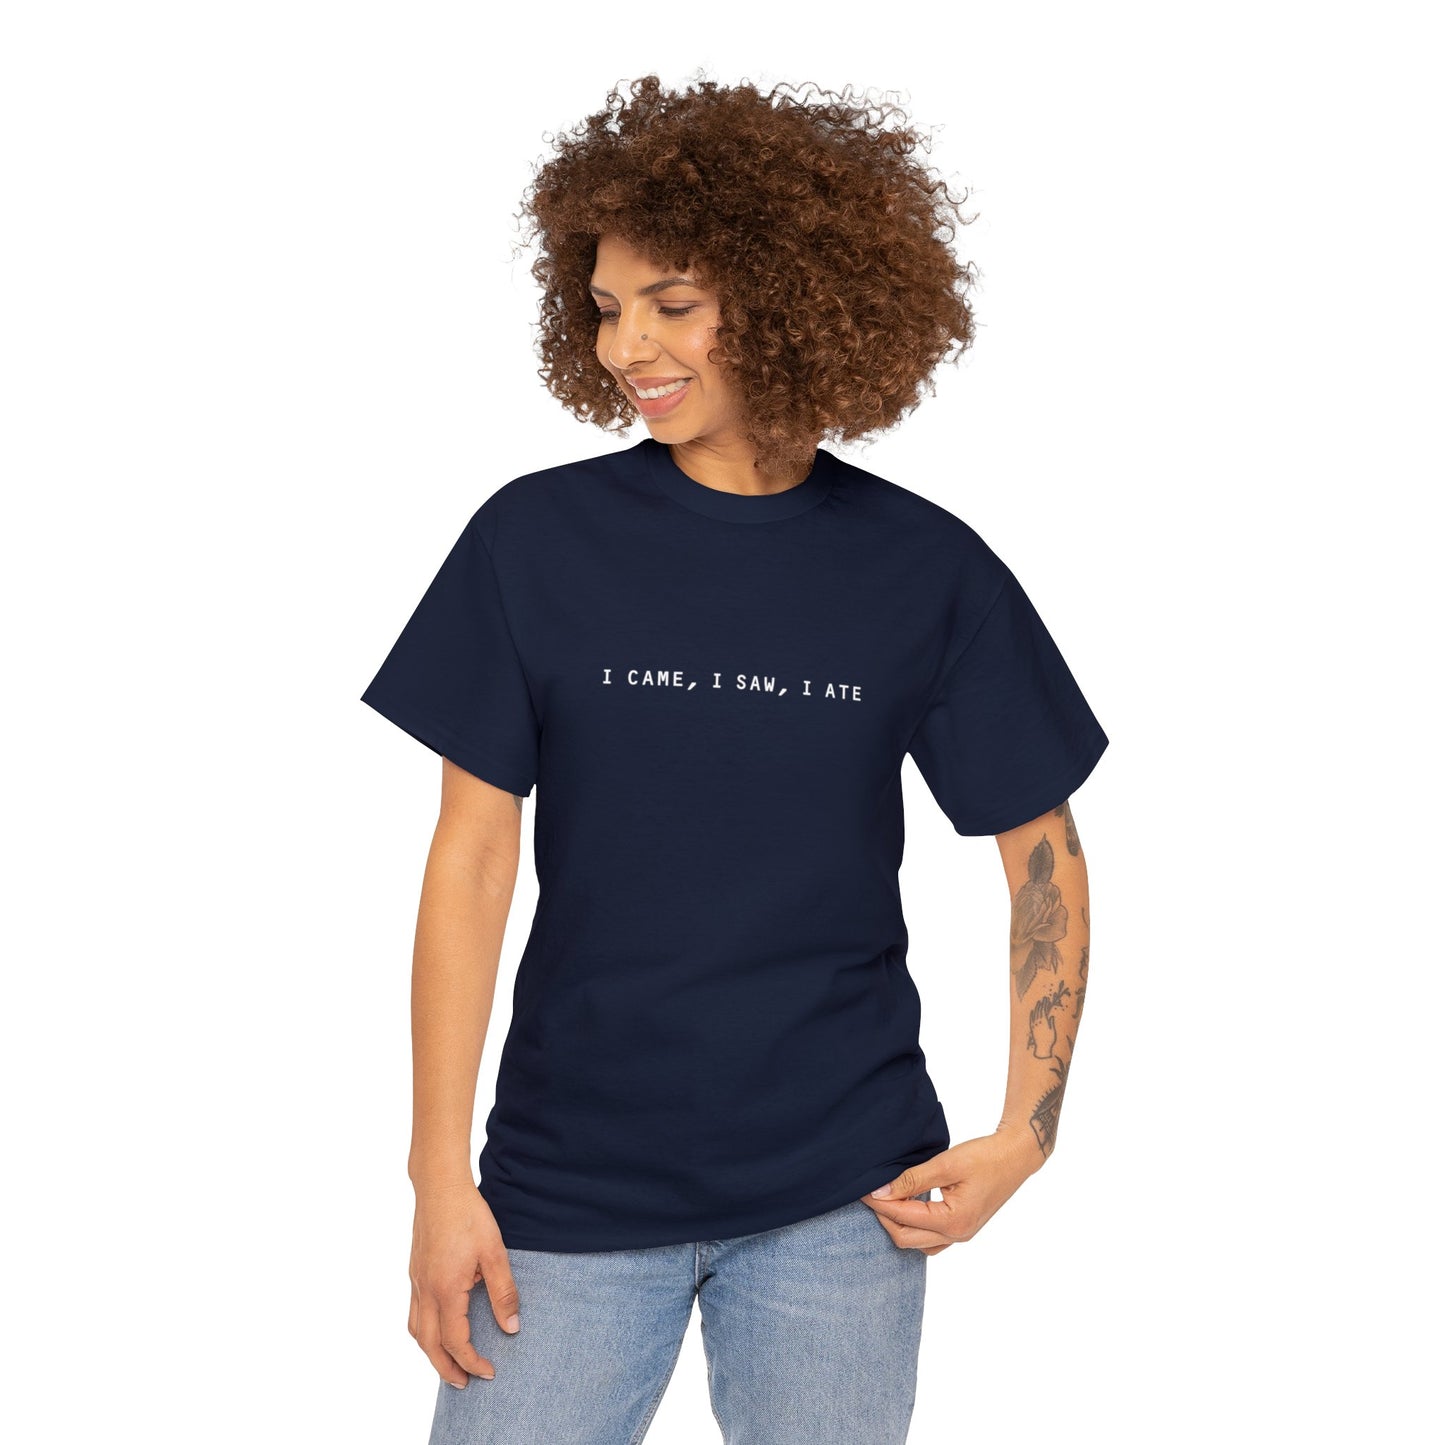 "I CAME, I SAW, I ATE" Text T-shirt Unisex Heavy Cotton Tee Simple Text for Travelers